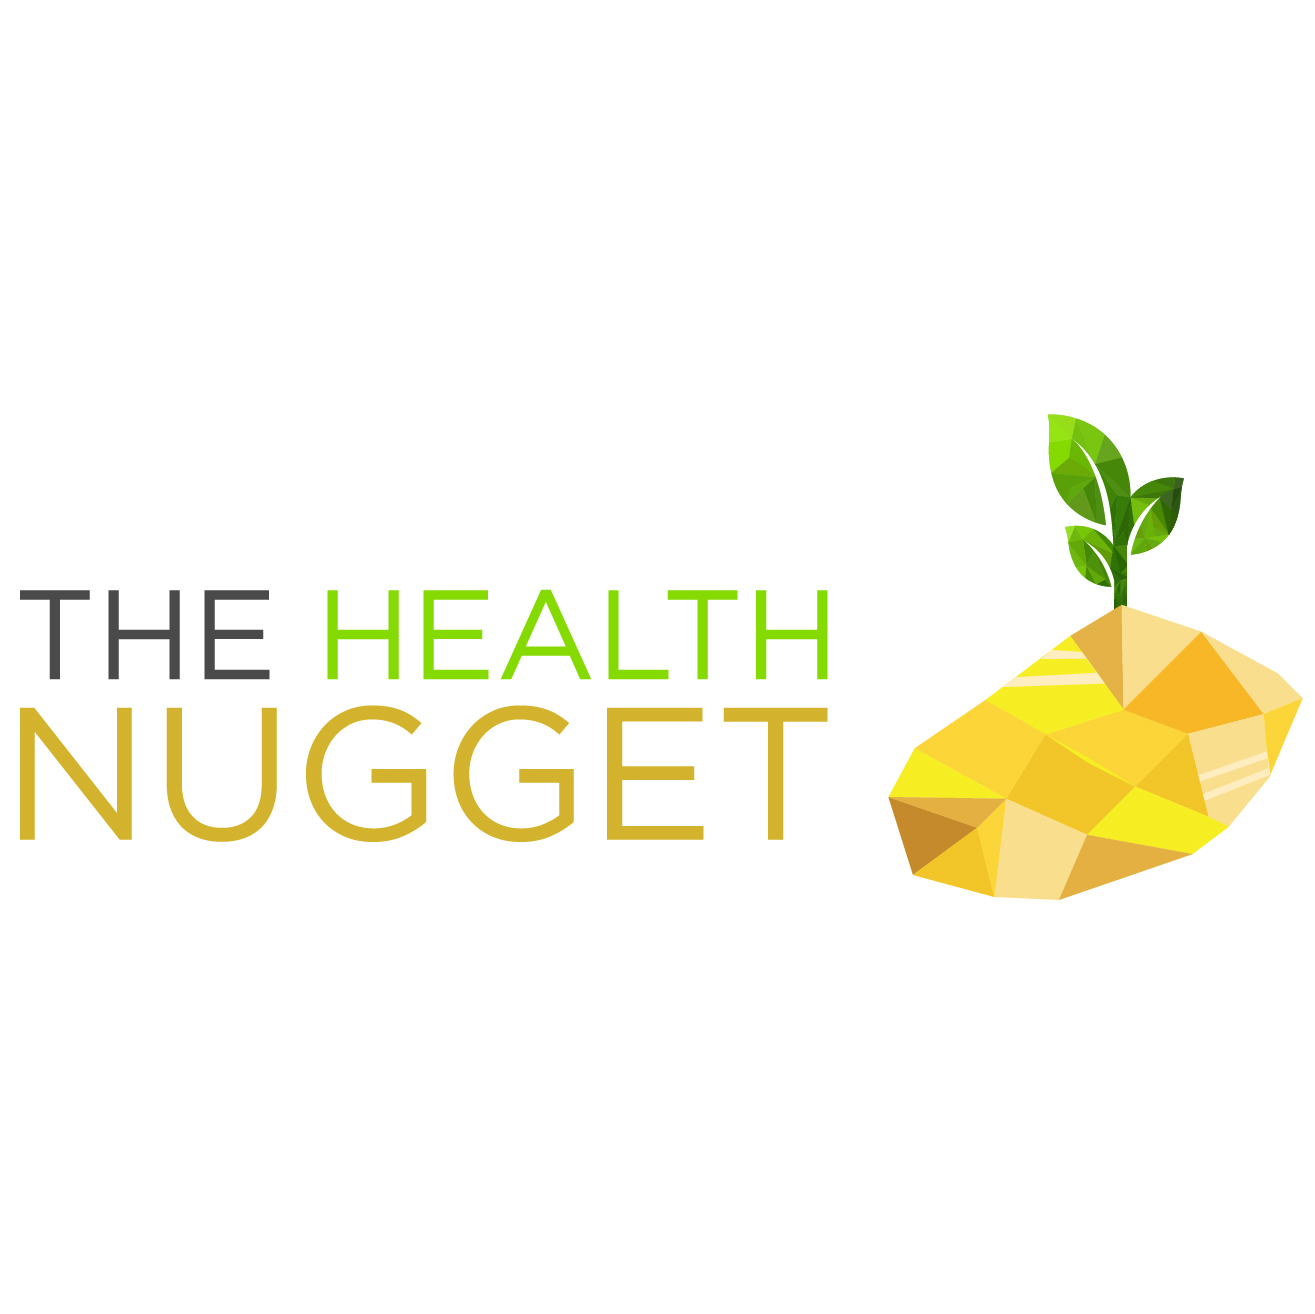 The Health Nugget